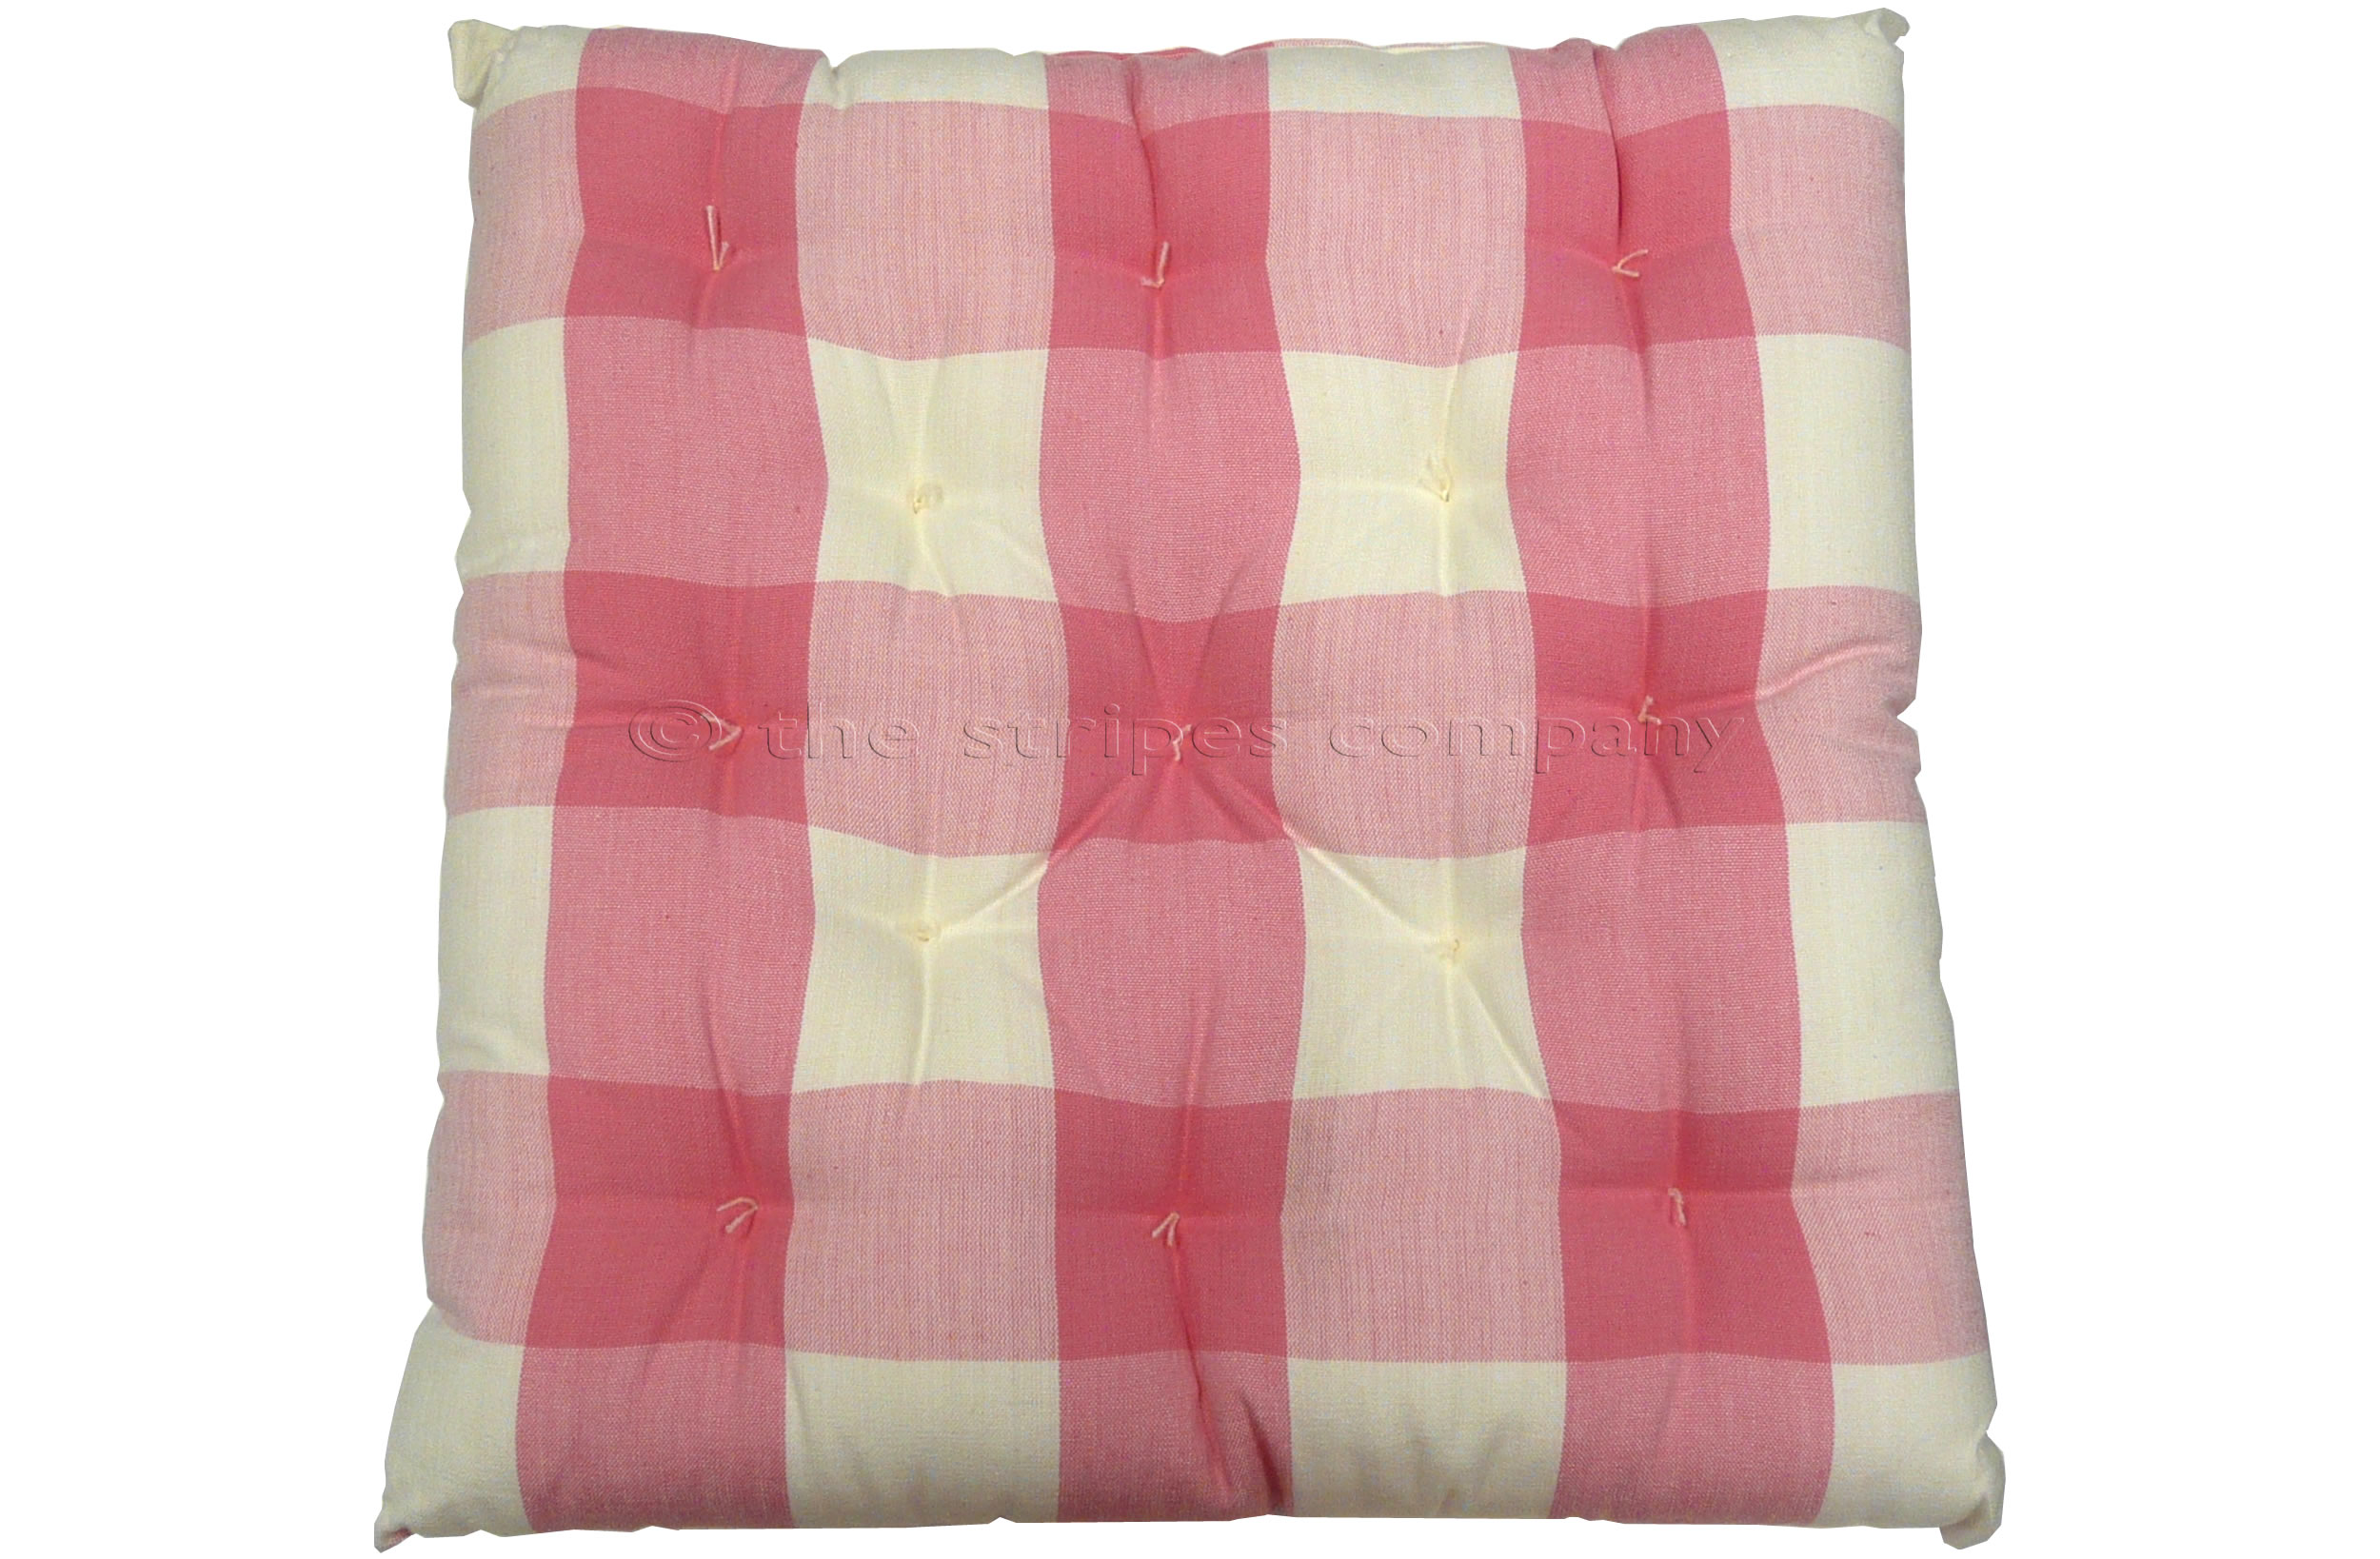 Pink and White Gingham Seat Pads | Large Check Chair Cushions | Vichy Check Seat Pads